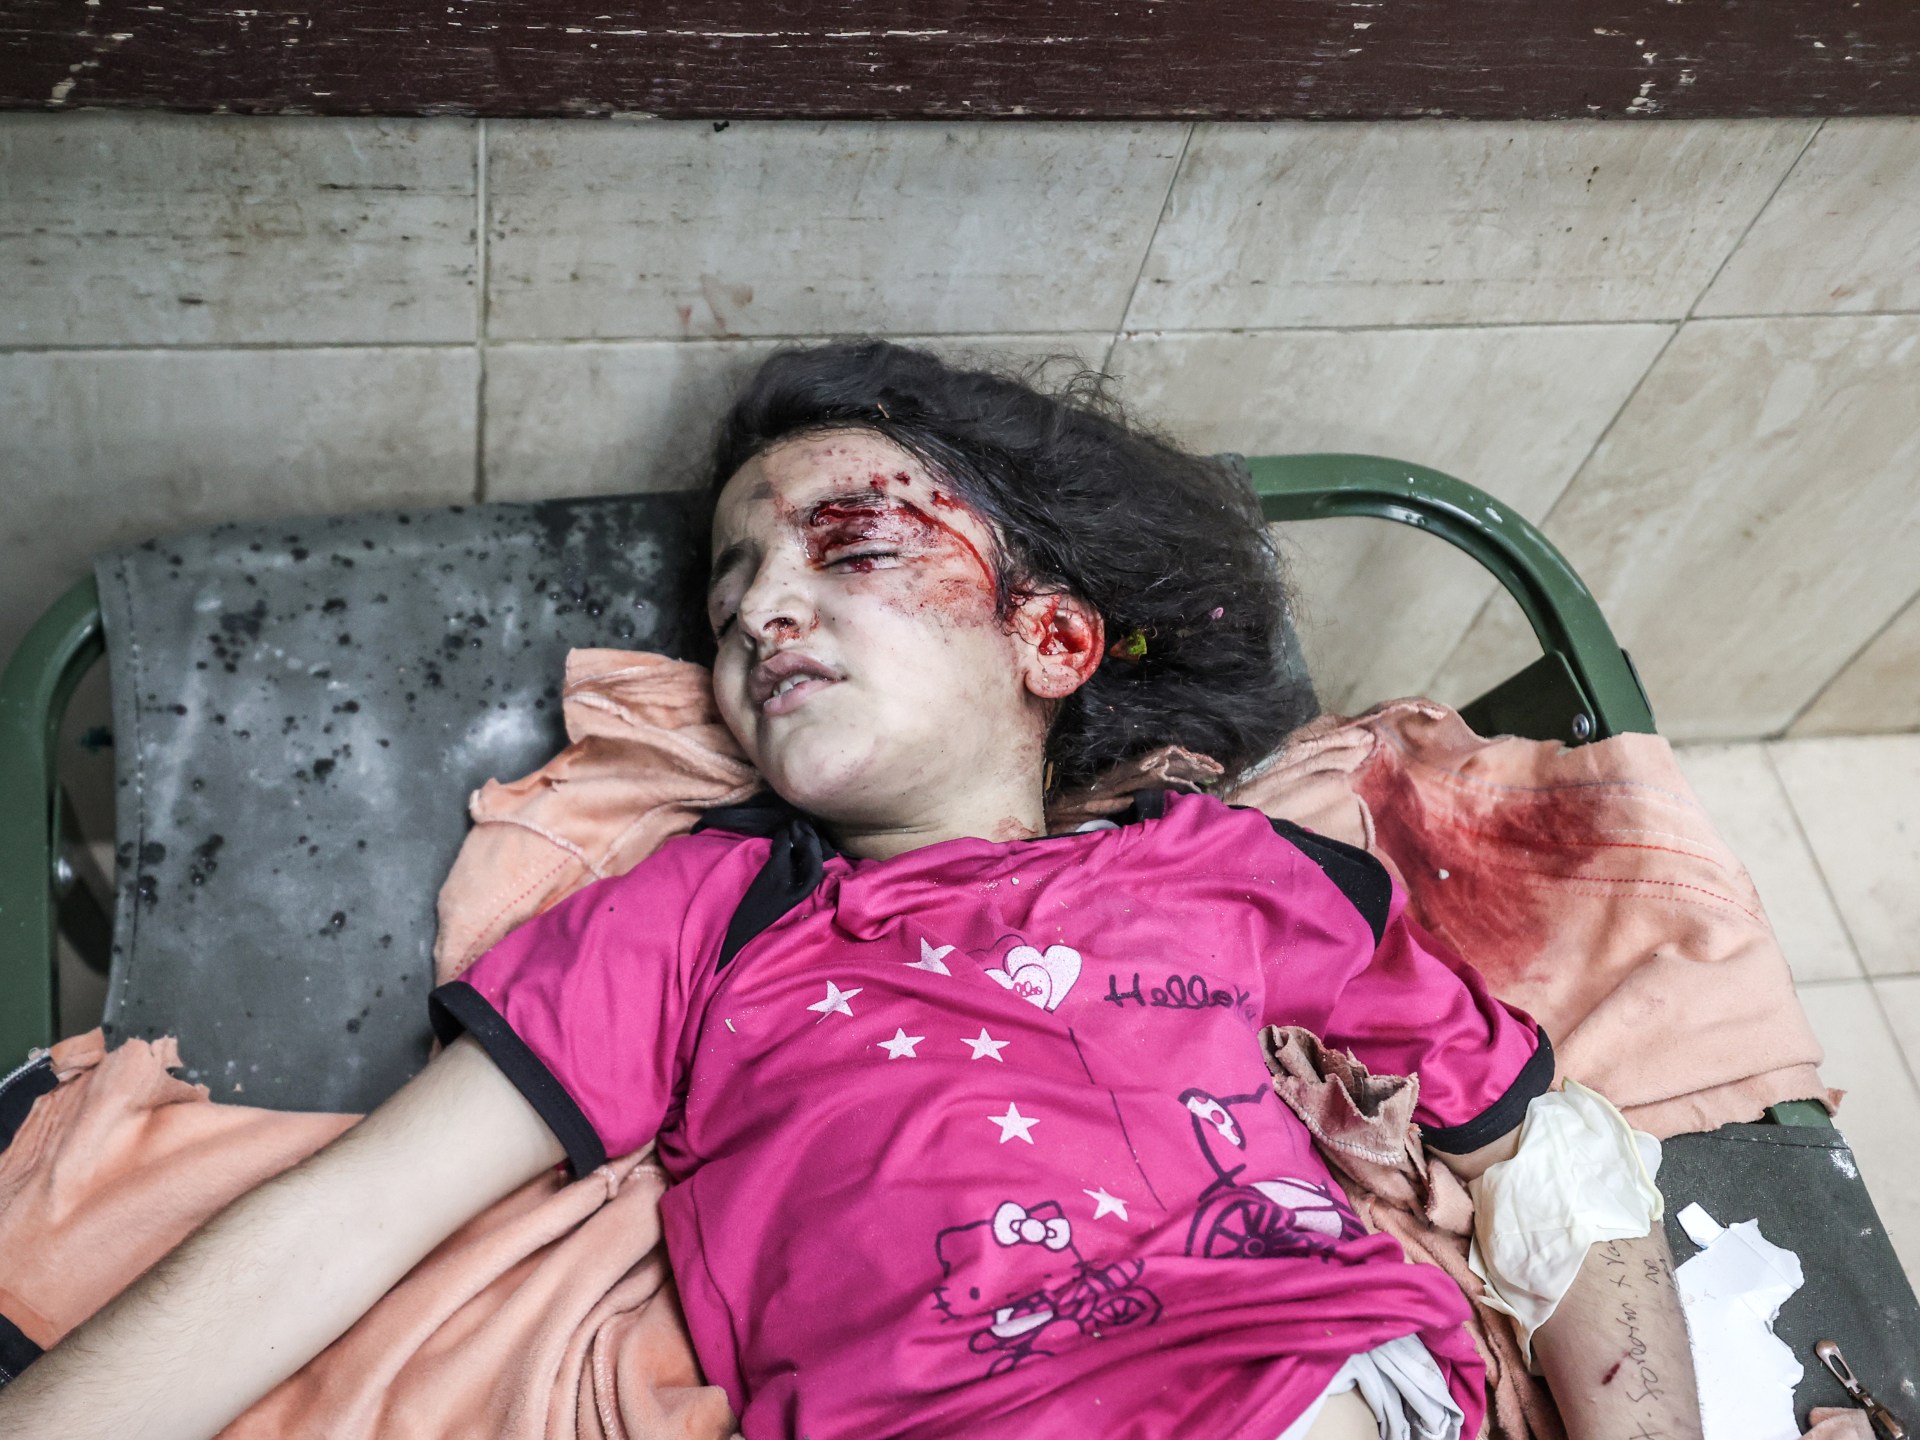 Photos: No end to suffering of Gaza children as Israeli attacks rage on